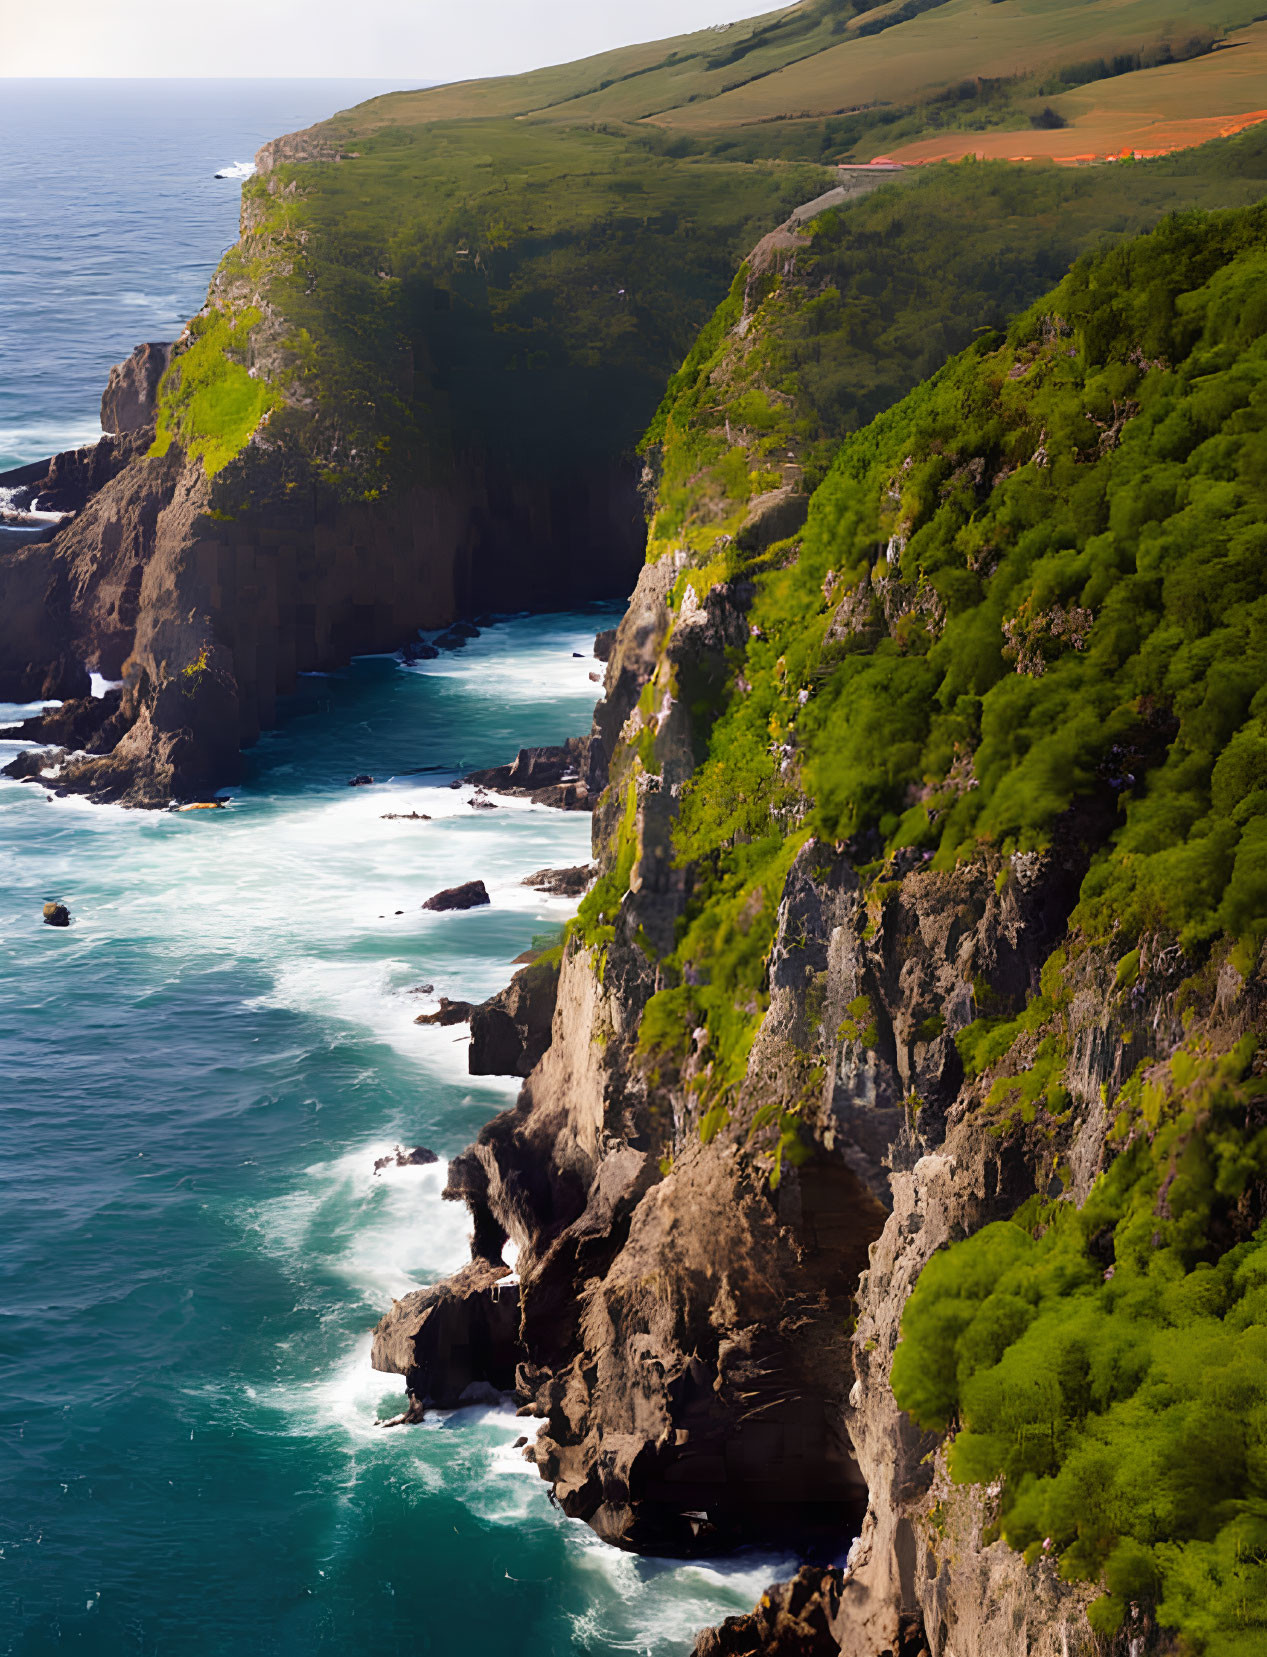 Steep cliffs and turquoise sea with crashing waves